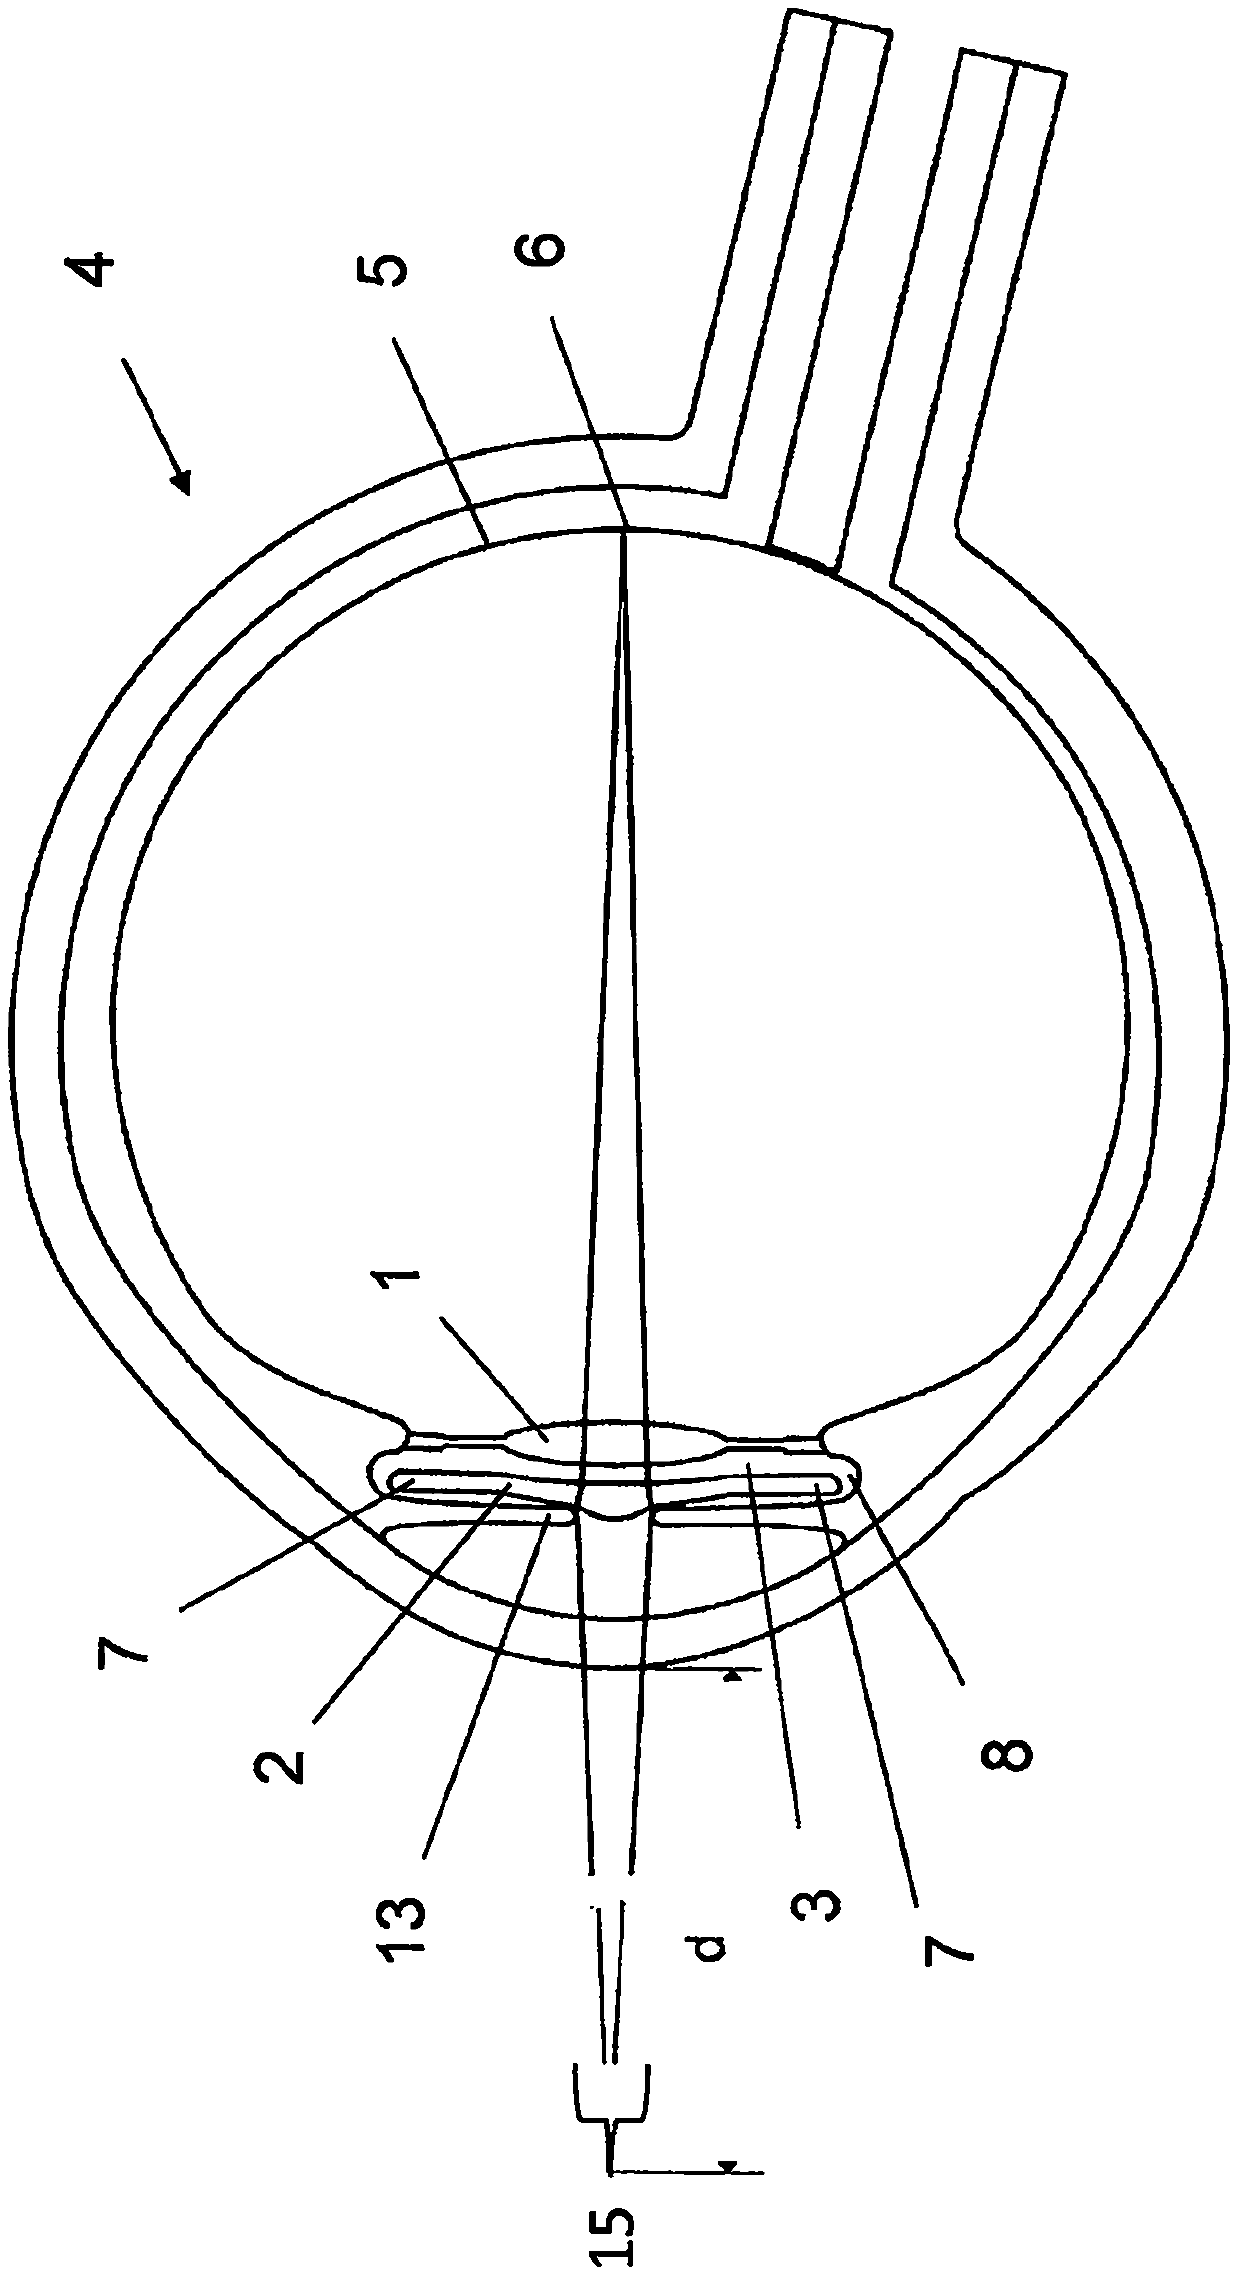 Two-stage intraocular lens with magnifying coaxial optic